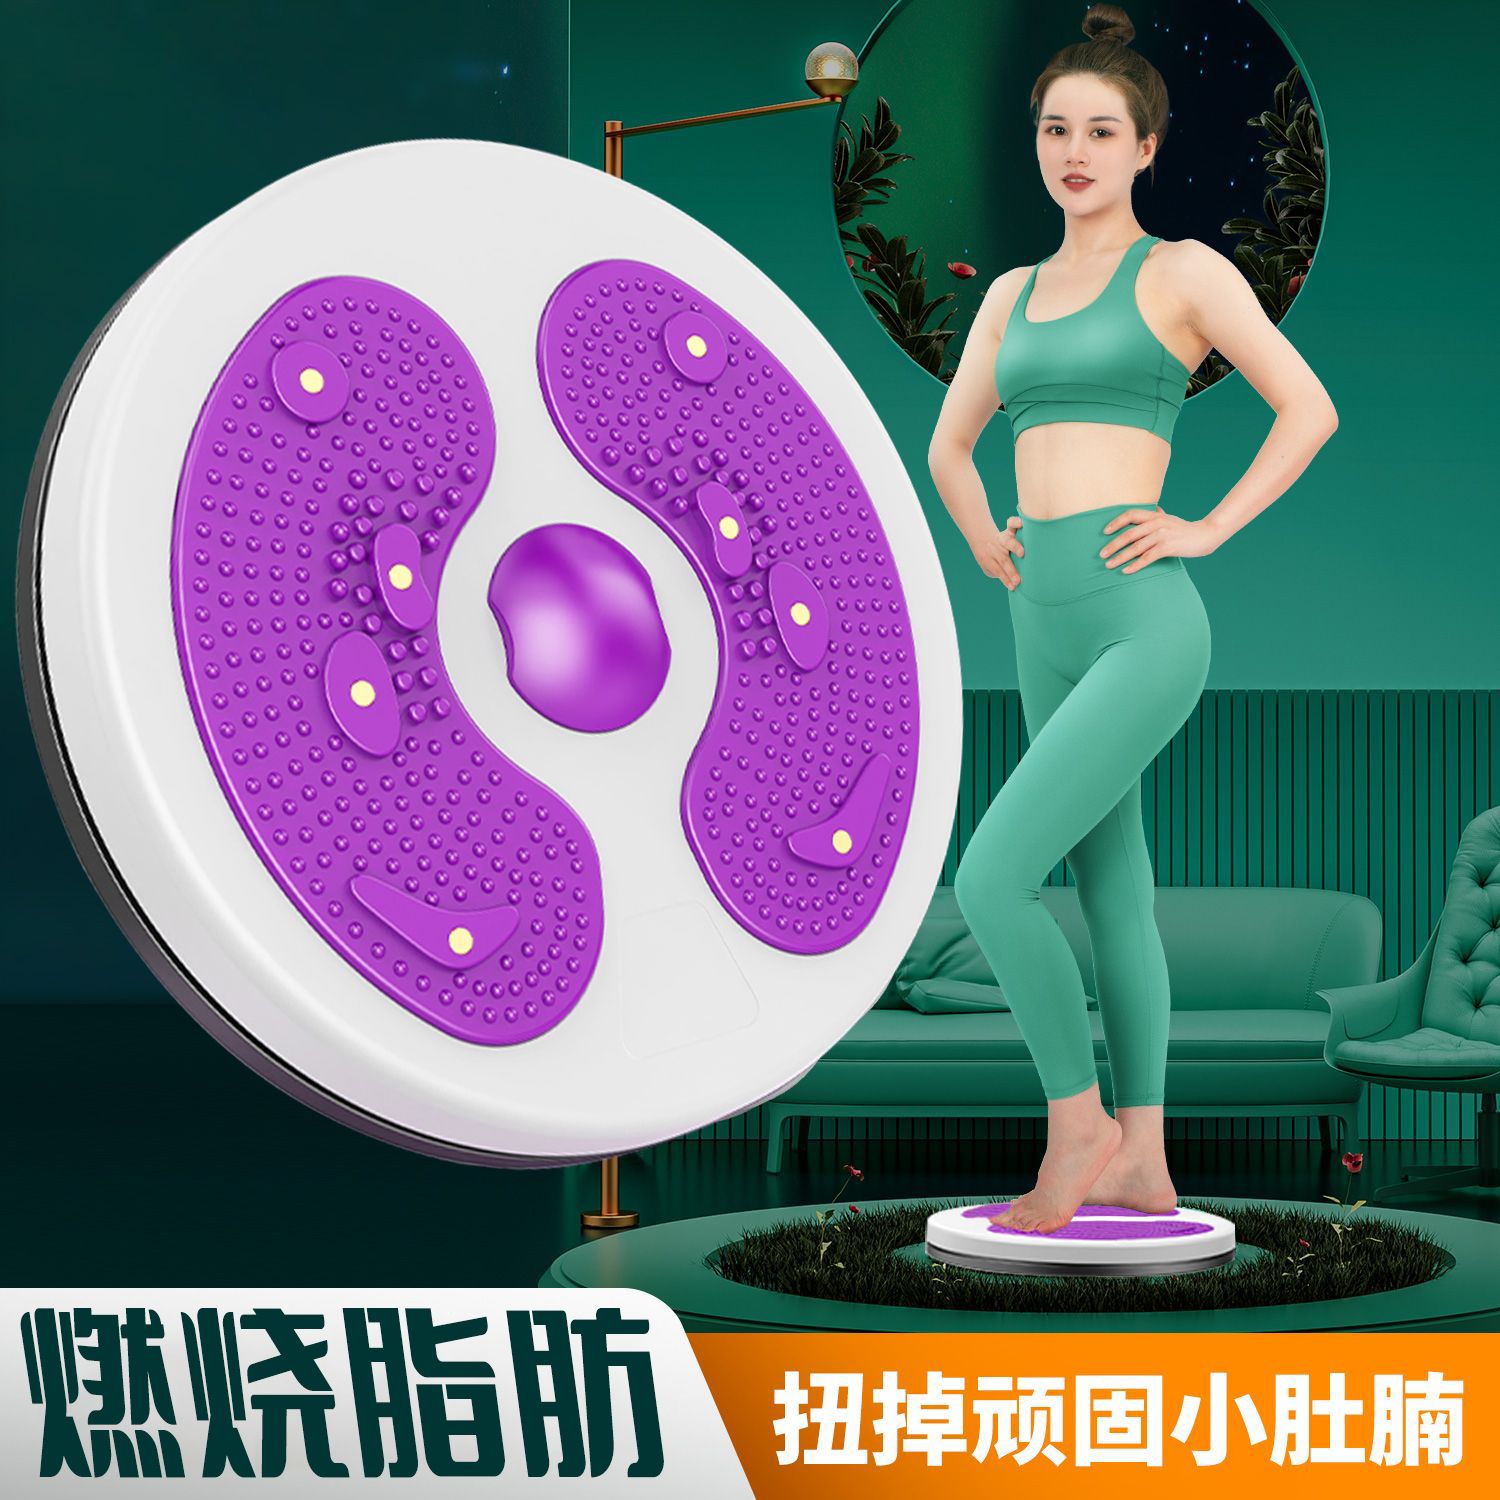 Twisted waist plate to lose weight and lose weight [load bearing 250 catties] Home fitness equipment for thin waist, thin belly and large foot massage